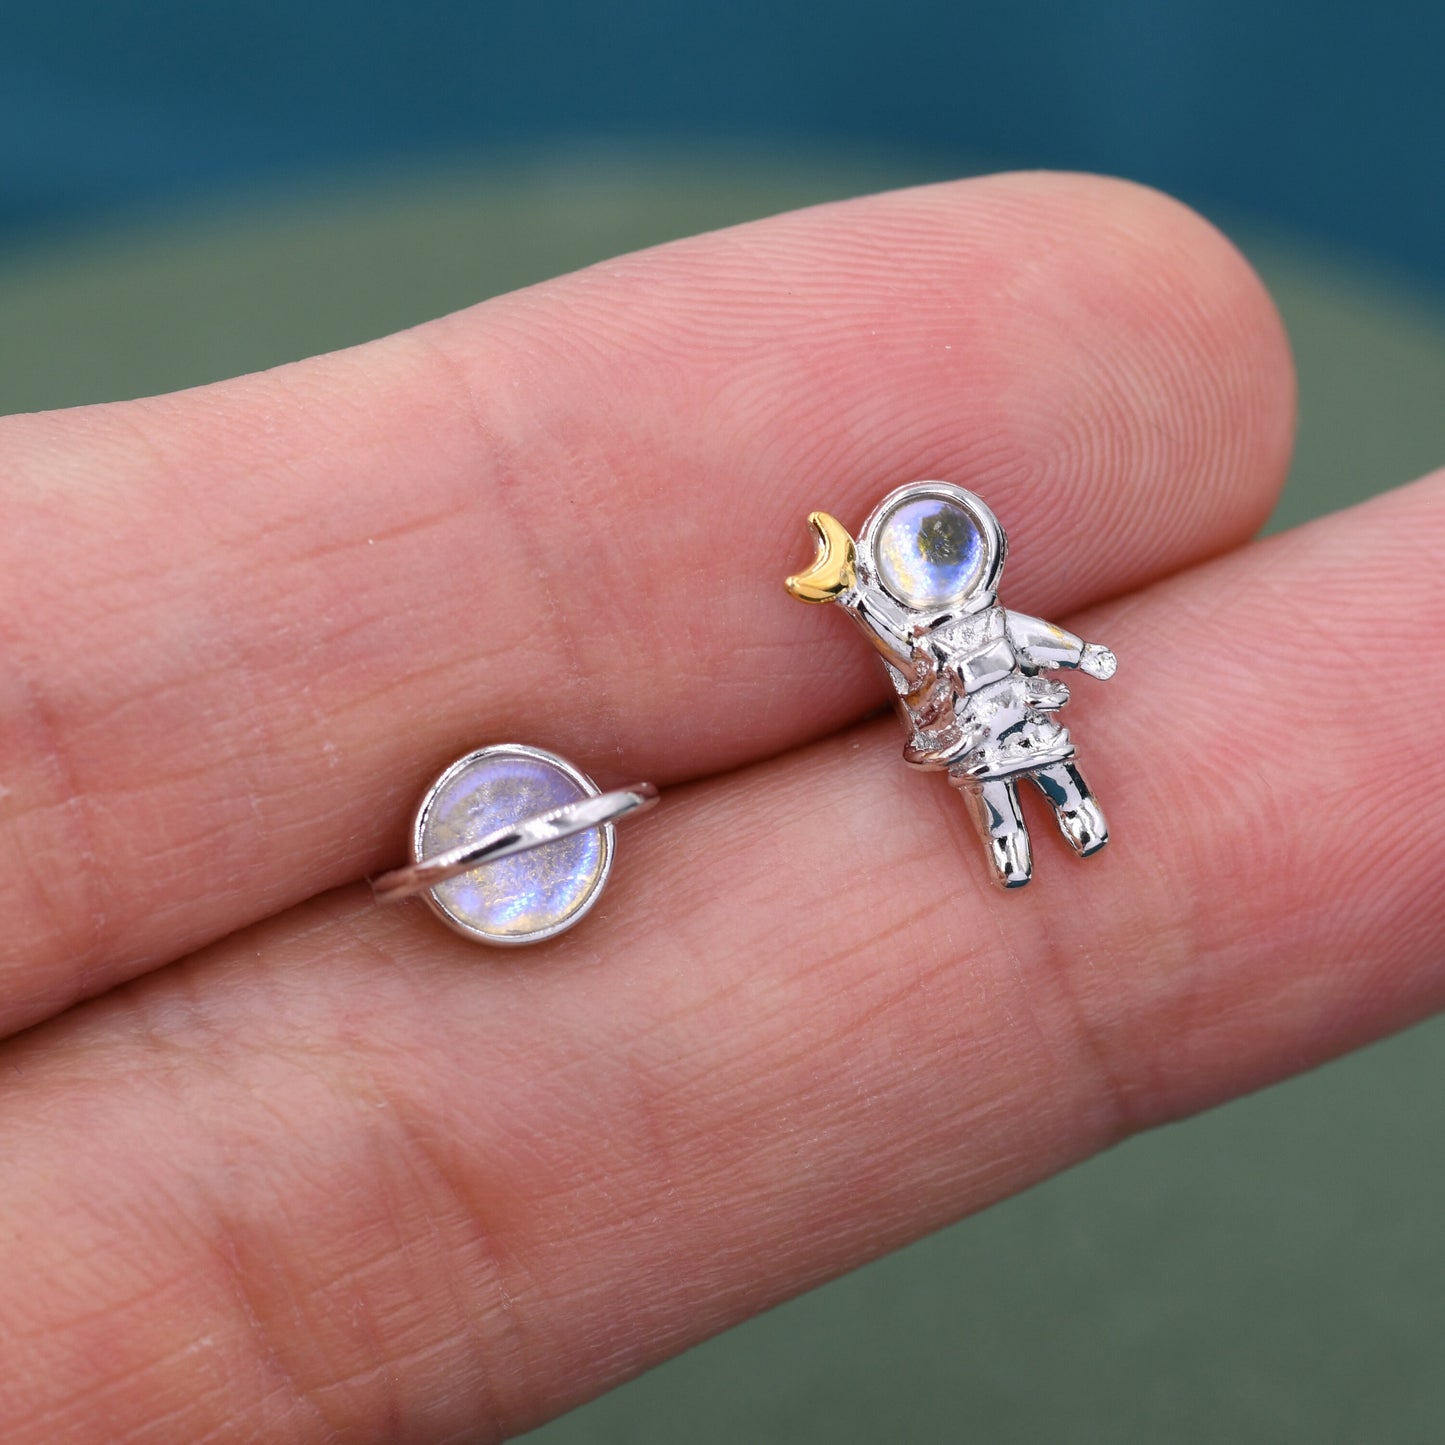 Mismatched Astronaut and Planet  Stud Earrings in Sterling Silver, Asymmetric Planet and Spaceman Earrings with Moonstone, Cute and Fun